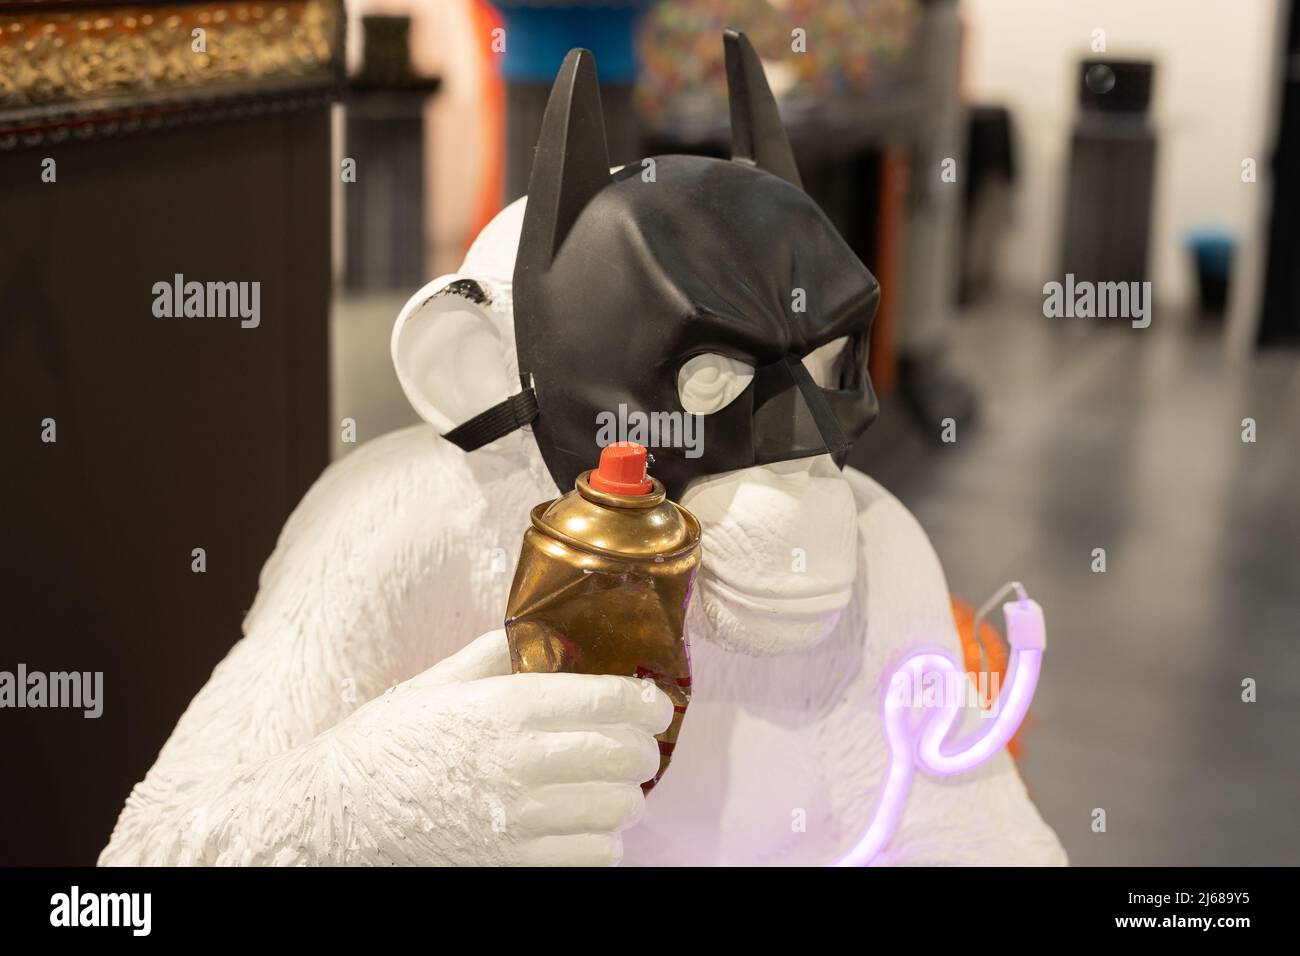 White Statue of a Monkey with a Black Mask on the Eyes Batman Style and a  Spray Can in its Hand Stock Photo - Alamy